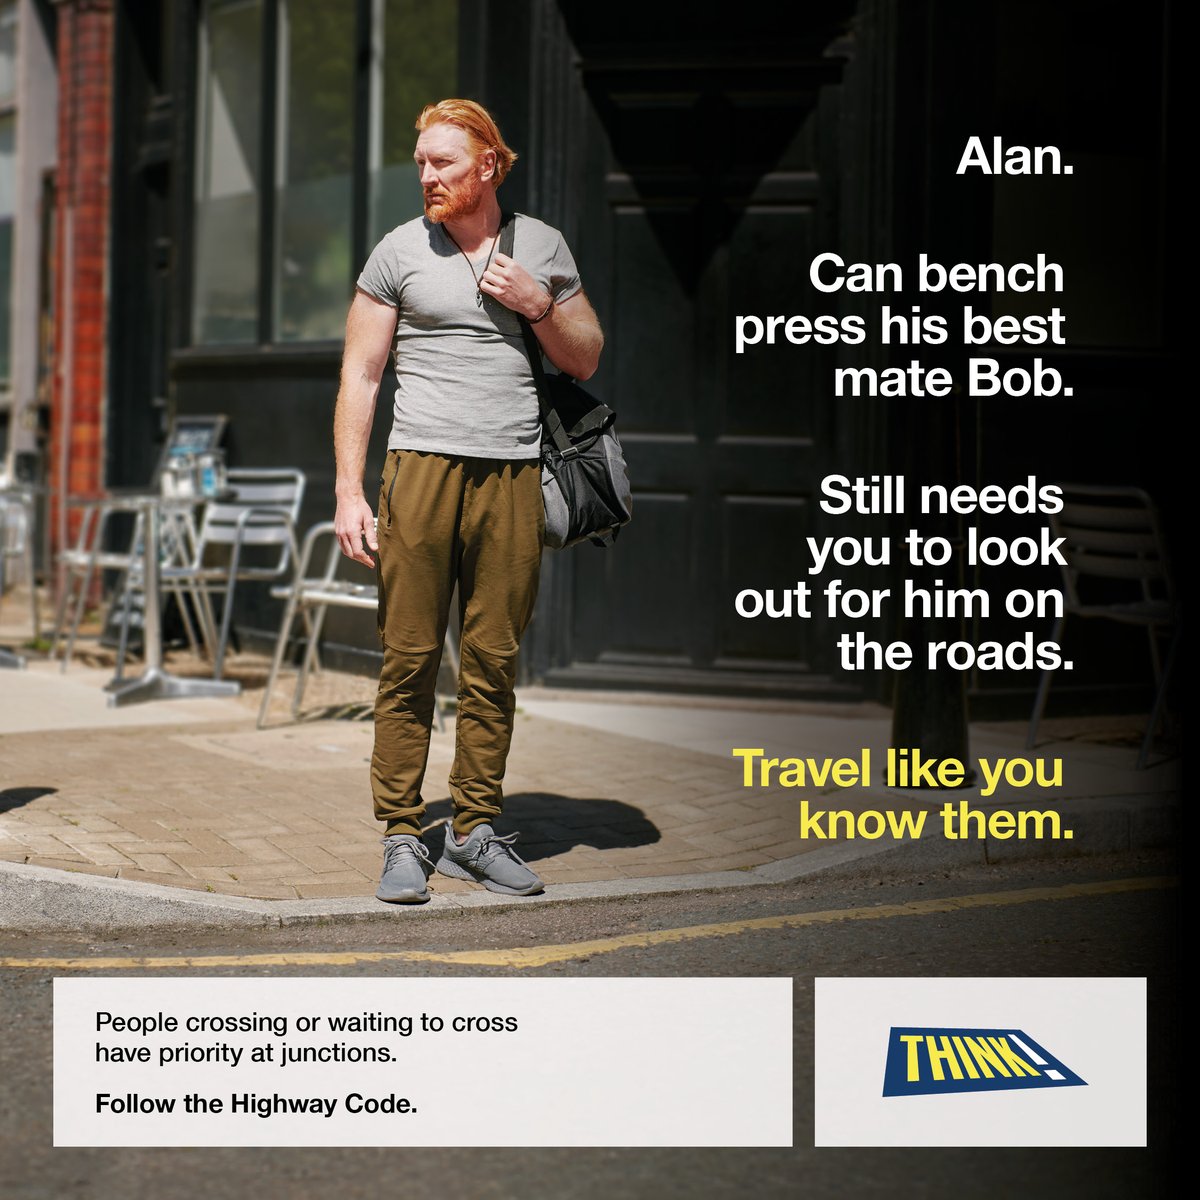 Pedestrians are a vulnerable road user and is reflected in the #HighwayCode.

People crossing/waiting to cross at a junction have priority. Other road users should drive carefully & slowly and give way to them when turning in/out of a junction.

Drive Aware. Walk Aware. #BeAware